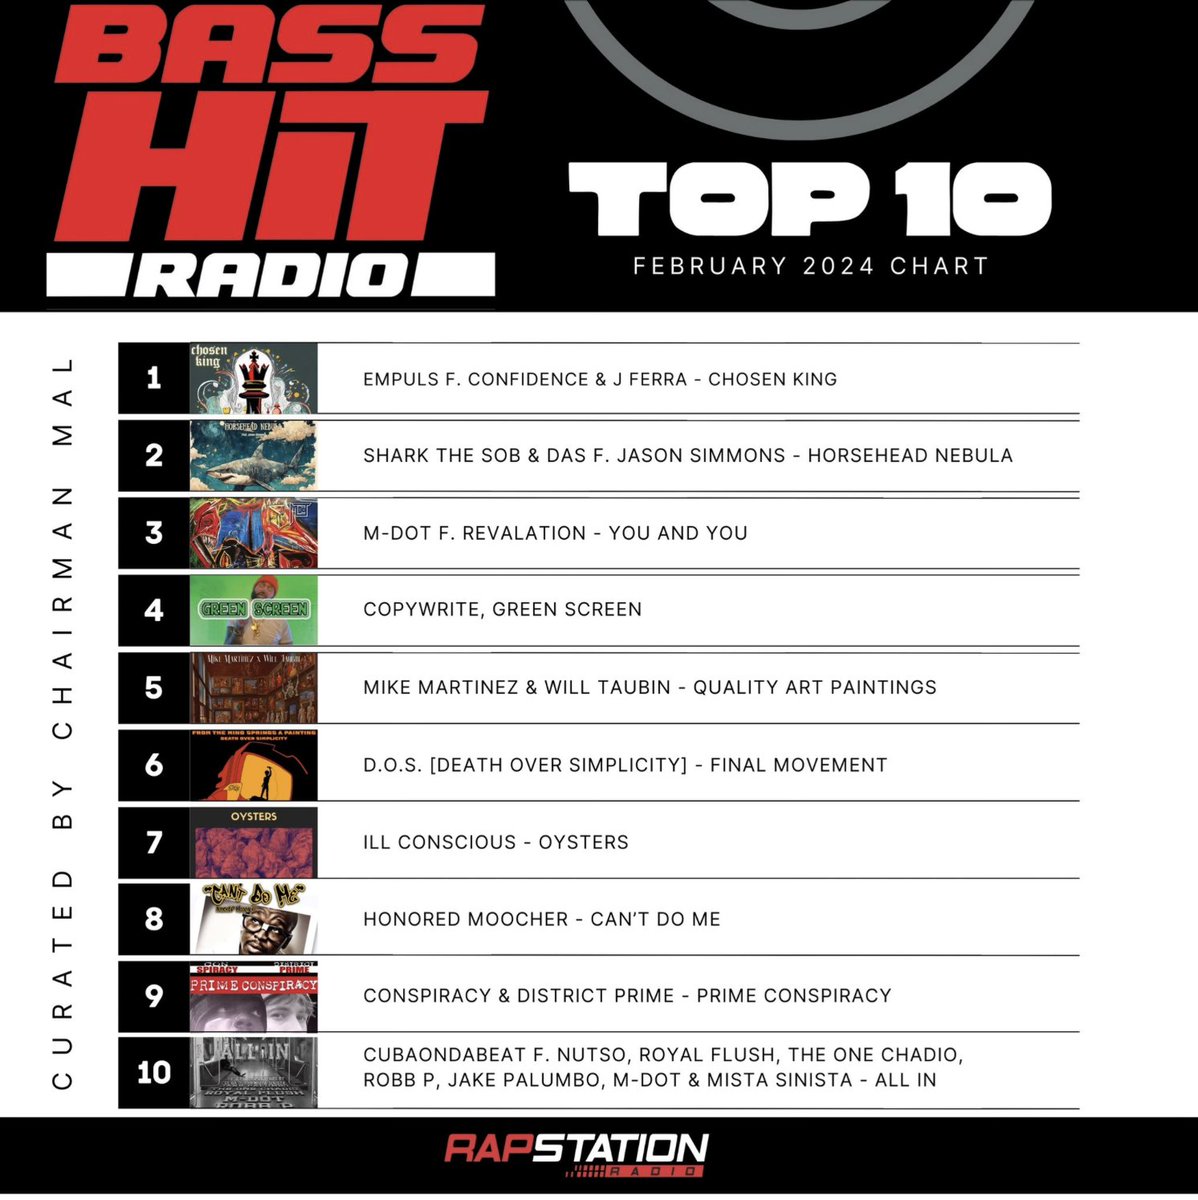 Very awesome to see 'Prime Conspiracy' from @conspiracy999 & @PrimordialEmcee (aka @NoTownVandal) make the @BassHitradio Top 10 for the month of February 2024. Compiled by @MalcolmRiddle and approved by @MrChuckD!